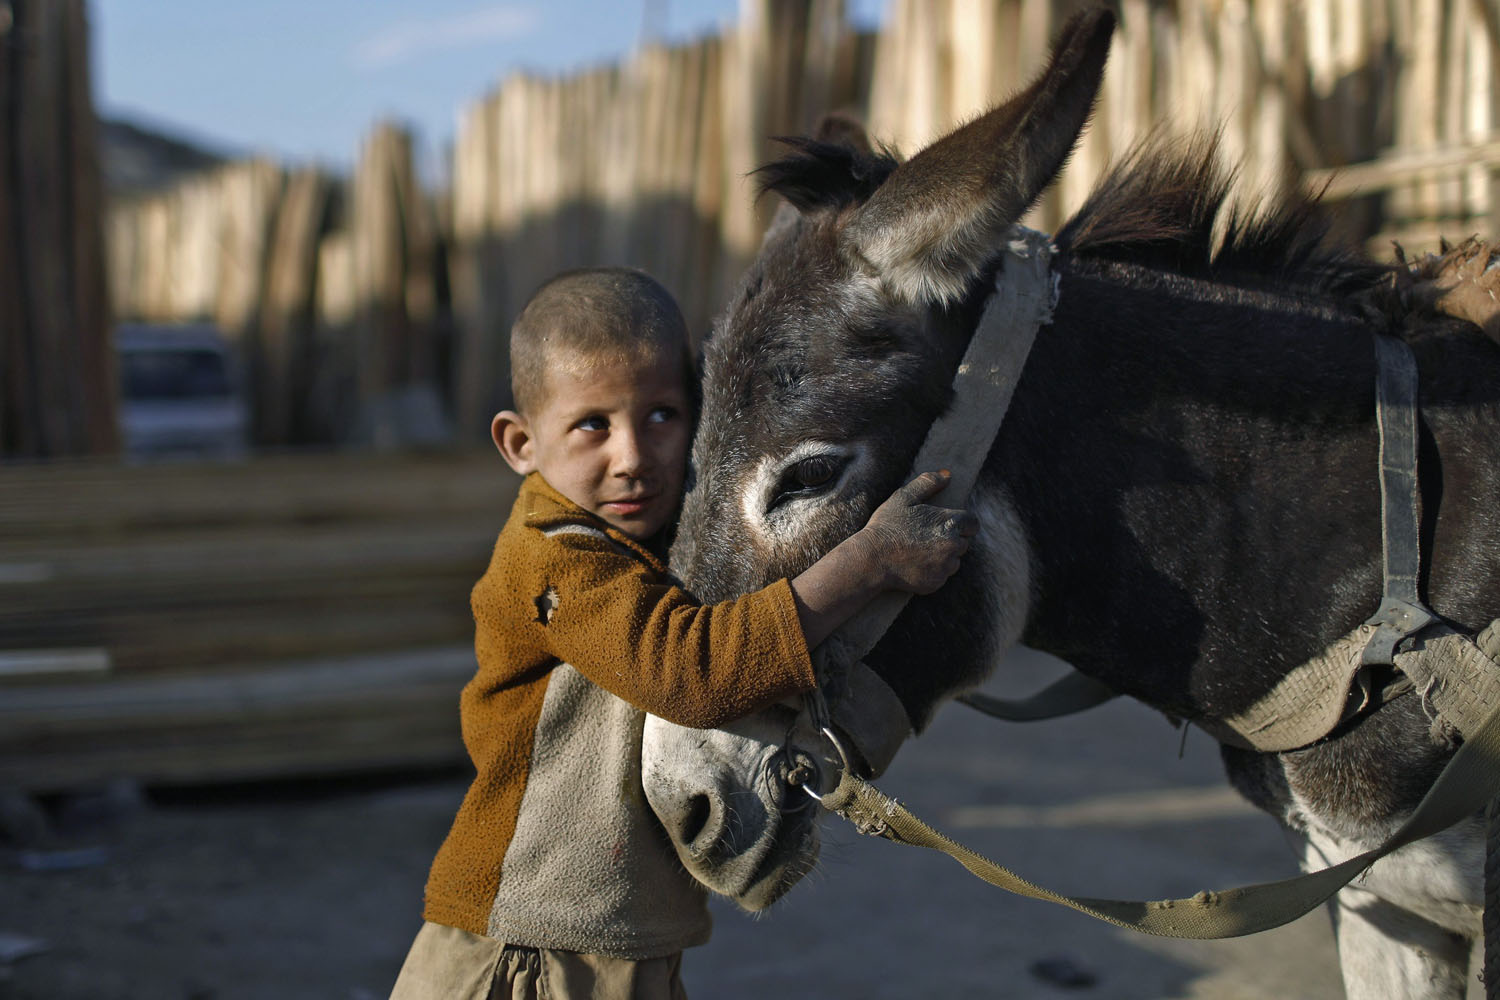 Image: Nov. 2, 2012. An Afghan boy stands next to his donkey cart outside a timber market in Kabul.